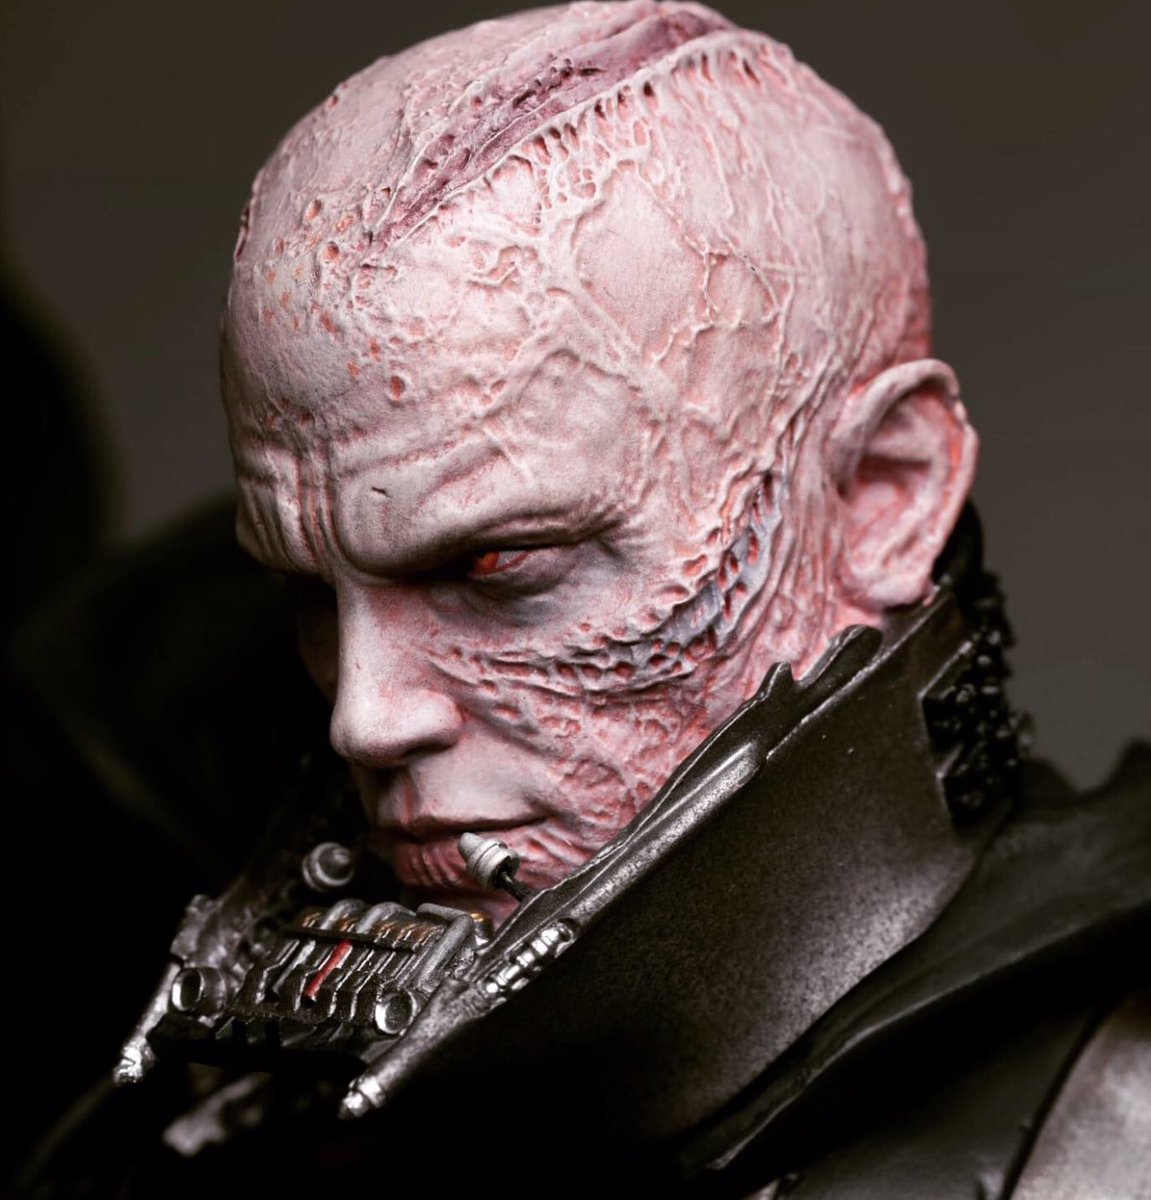 The Dark Lord of the Sith.Creating this portrait has been a incredibly rewarding experience…. #starwars #starwarsnerd #sideshowcollectibles #mythos #maythe4thbewithyou #kucharekbrothersstudios #kucharekbrothers #darthvader #darthmaul #asajjventress #statuescollectors